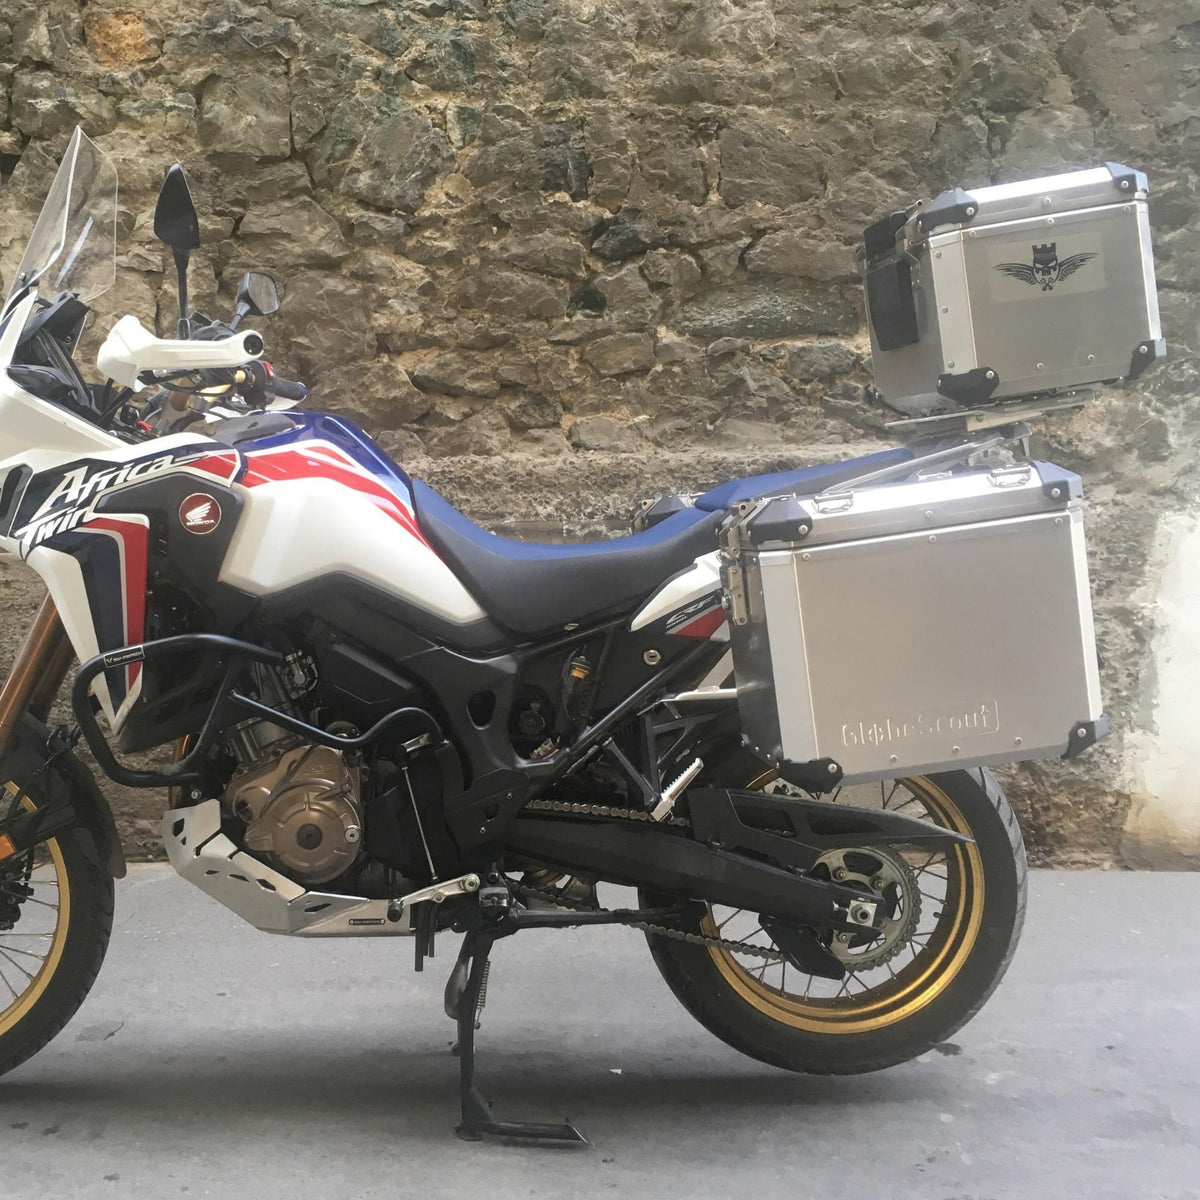 XPAN+ Aluminum Side Case Set, Honda CRF1000 L / CRF1100 L Africa Twin and Africa Twin ADV Sports ES (2016 - 2021), KTM 1290 Super Adventure (2021), 2.02.02301, adventure bike luggage, adventure motorcycle panniers, aluminum side cases, GlobeScout motorcycle luggage, GlobeScout XPAN+, Honda, Honda CRF1000 L Africa Twin, Honda CRF1000 L Africa Twin ADV Sports ES, Honda CRF1100 L Africa Twin, Honda CRF1100 L Africa Twin ADV Sports ES, KTM, KTM 1290 Super Adventure, Side Case Sets, XPAN+, Side Case Sets - Impor